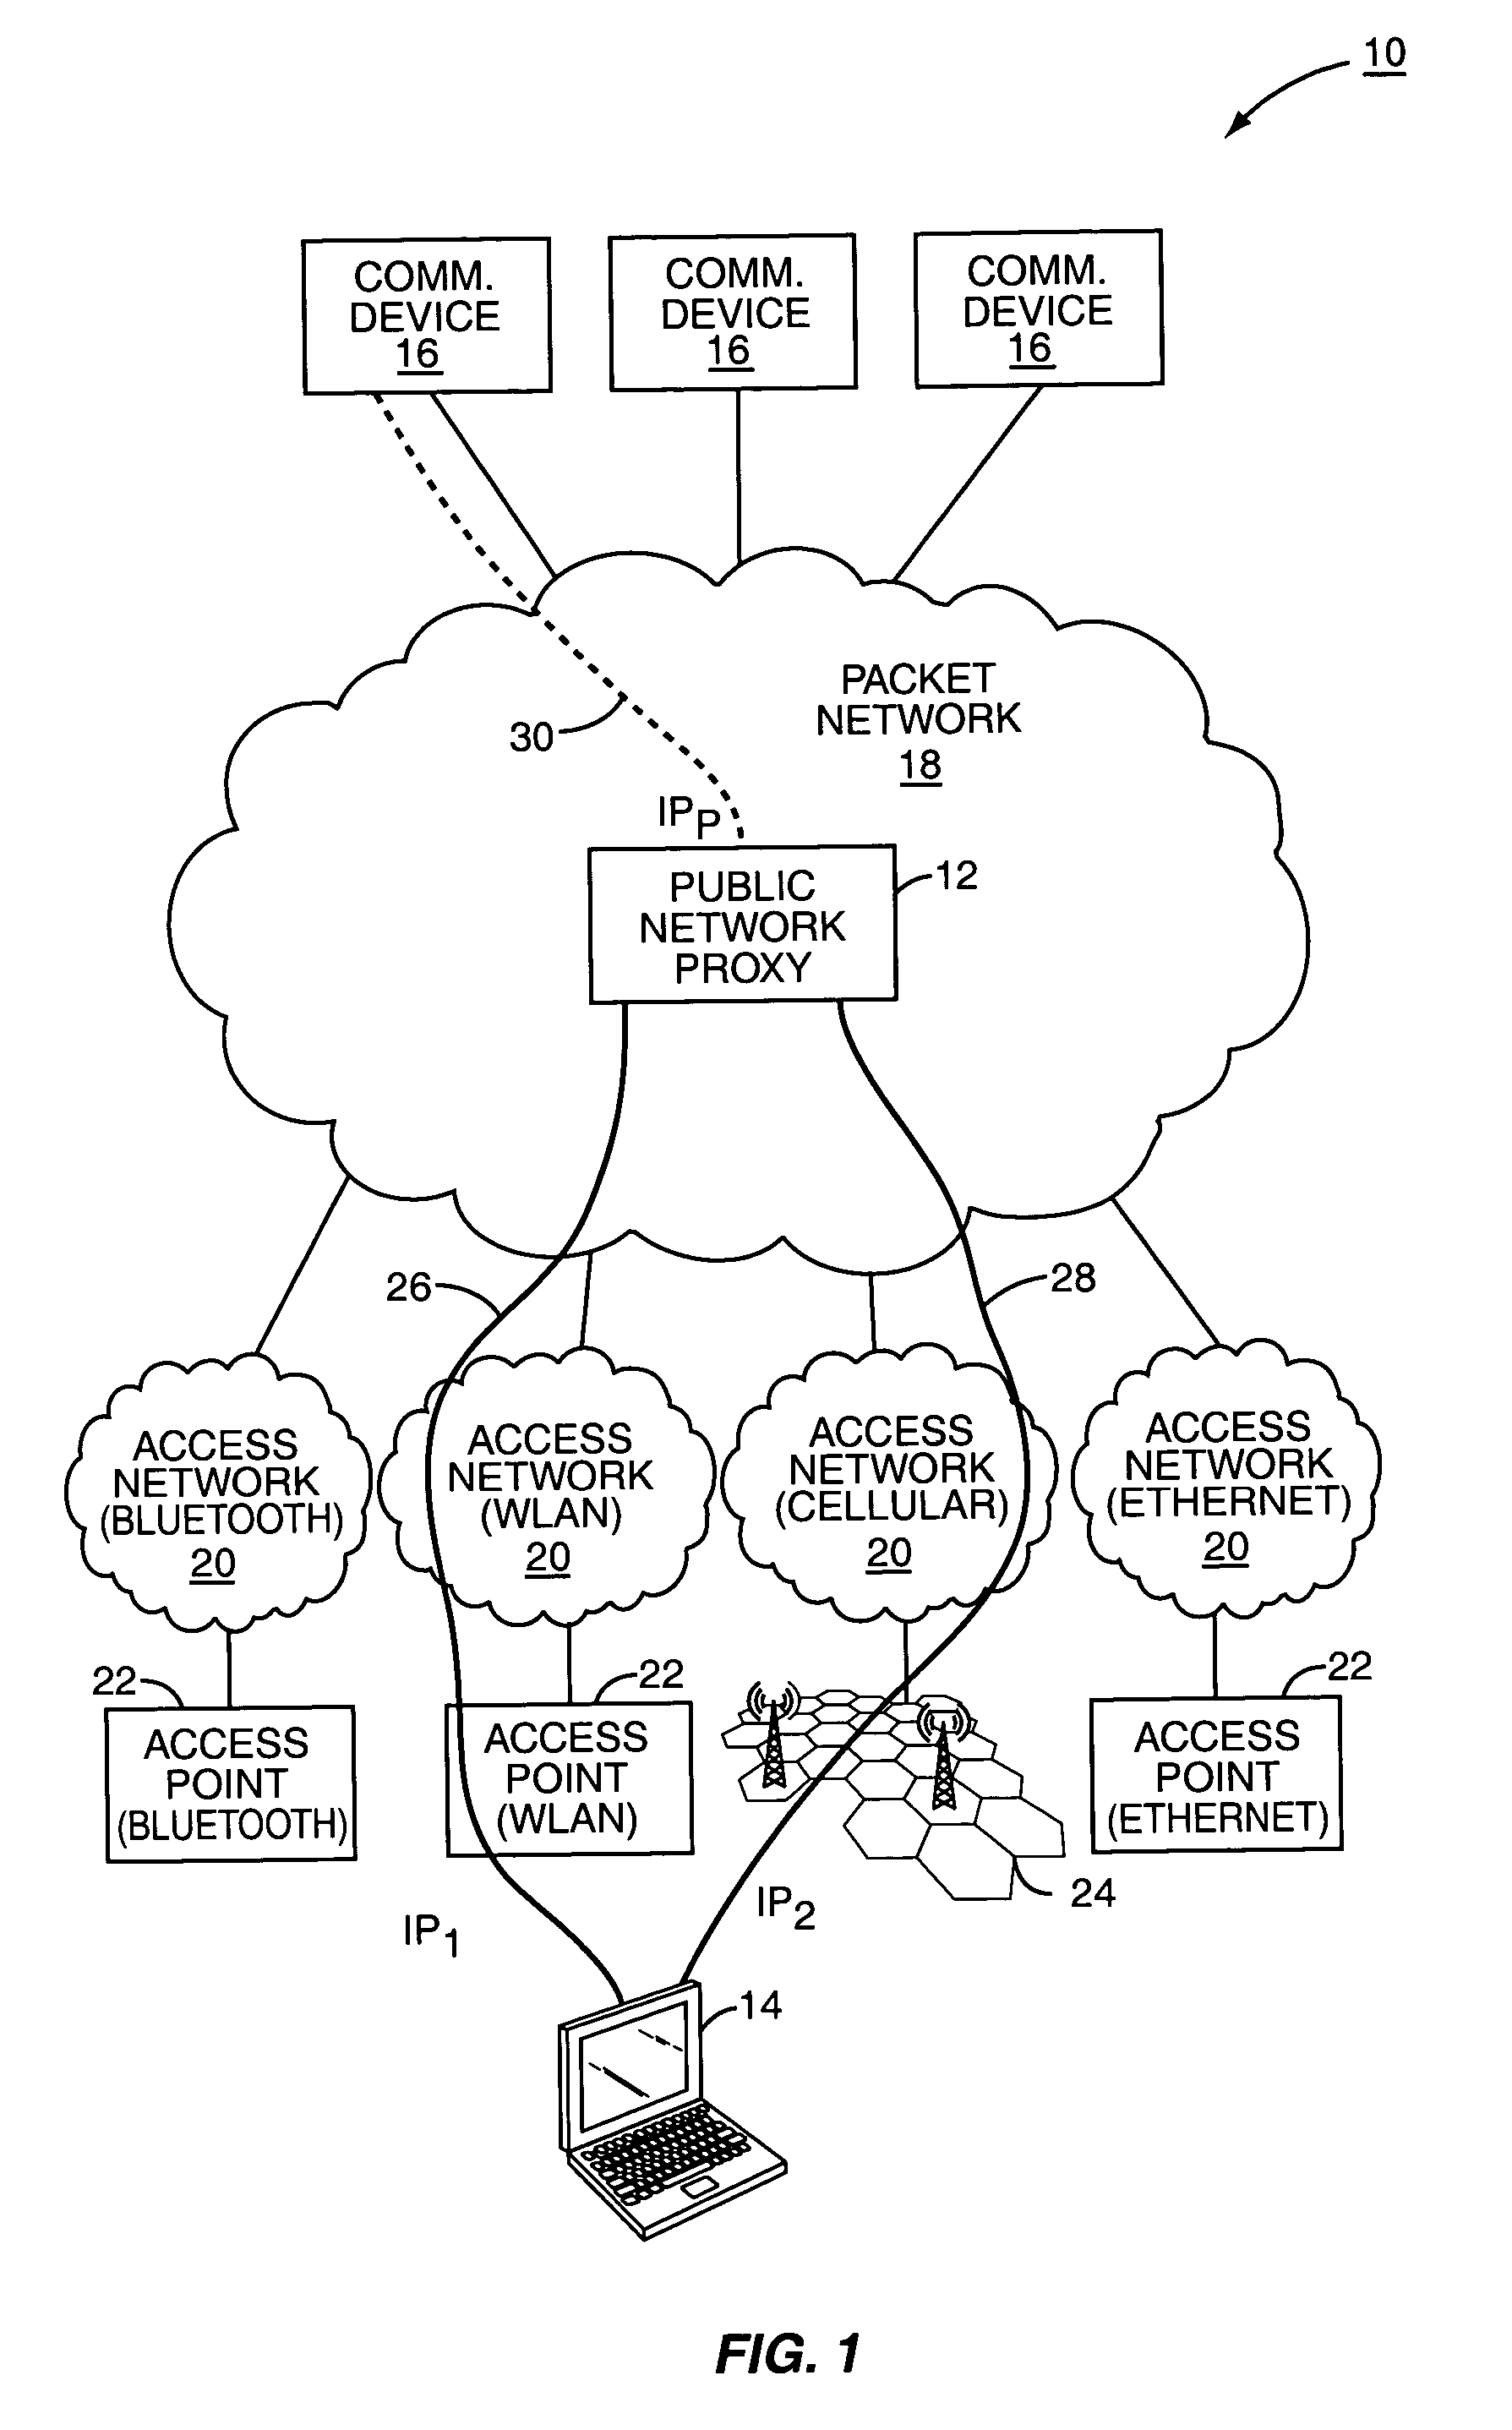 Mobility in a multi-access communication network